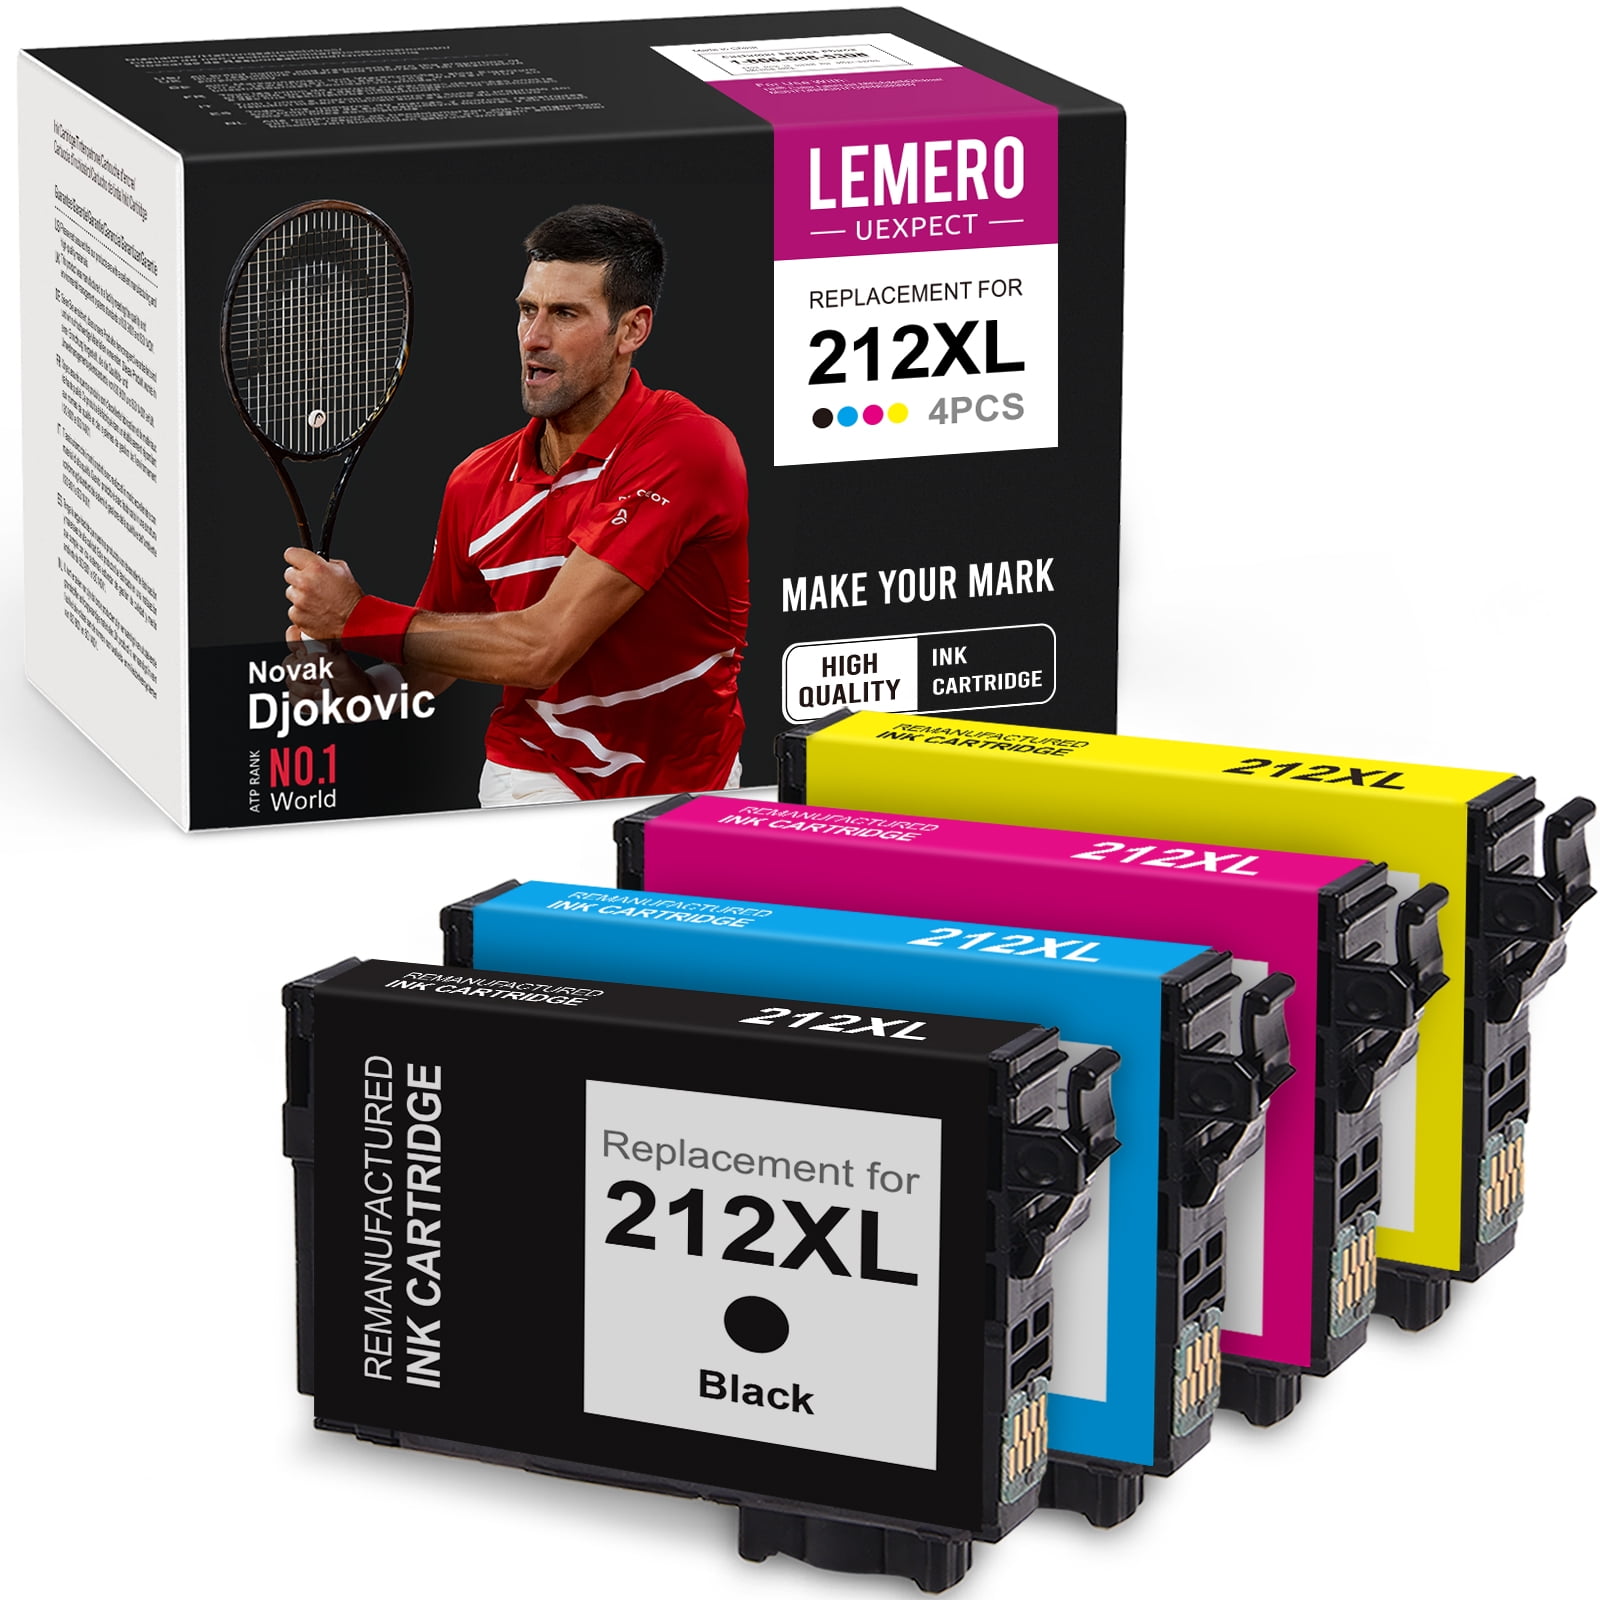 Magenta HOT Remanufactured Ink Cartridge Replacement for Epson 212 XL 212XL T212XL320 for Workforce WF-2830 WF-2850 Expression XP-4100 XP-4105 Printers 